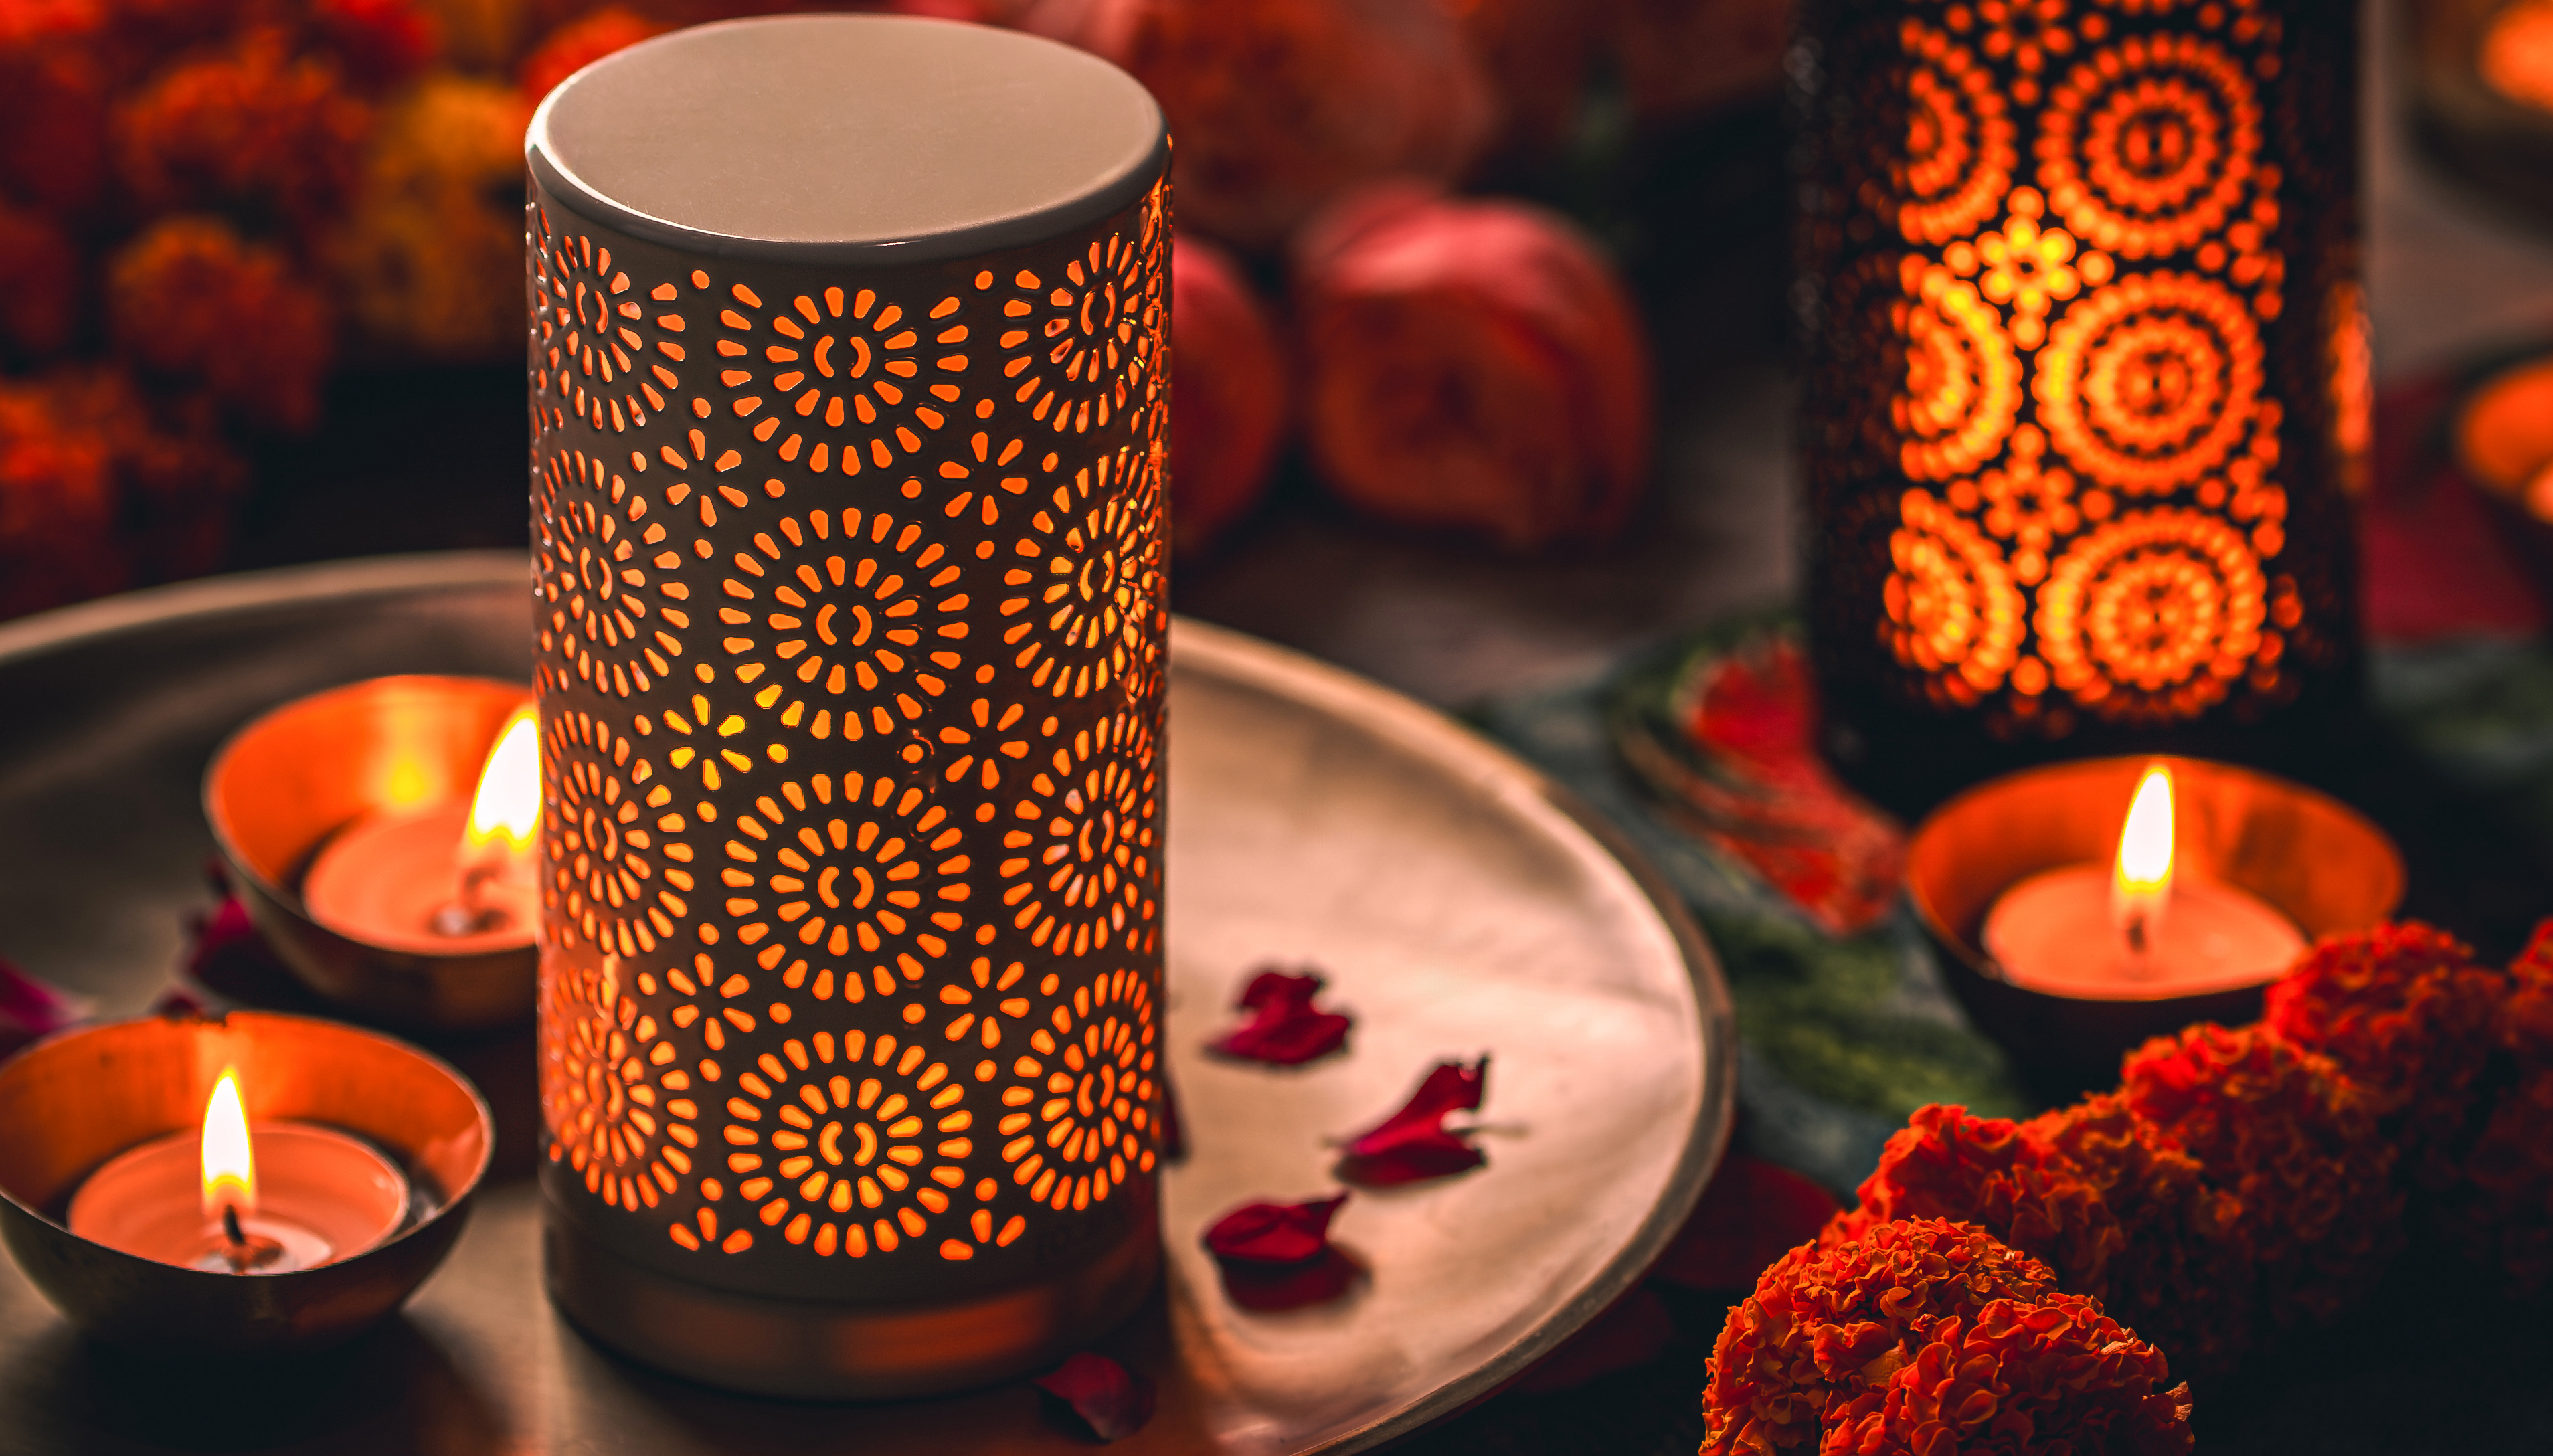 Why you should illuminate your home with Rosha this Diwali